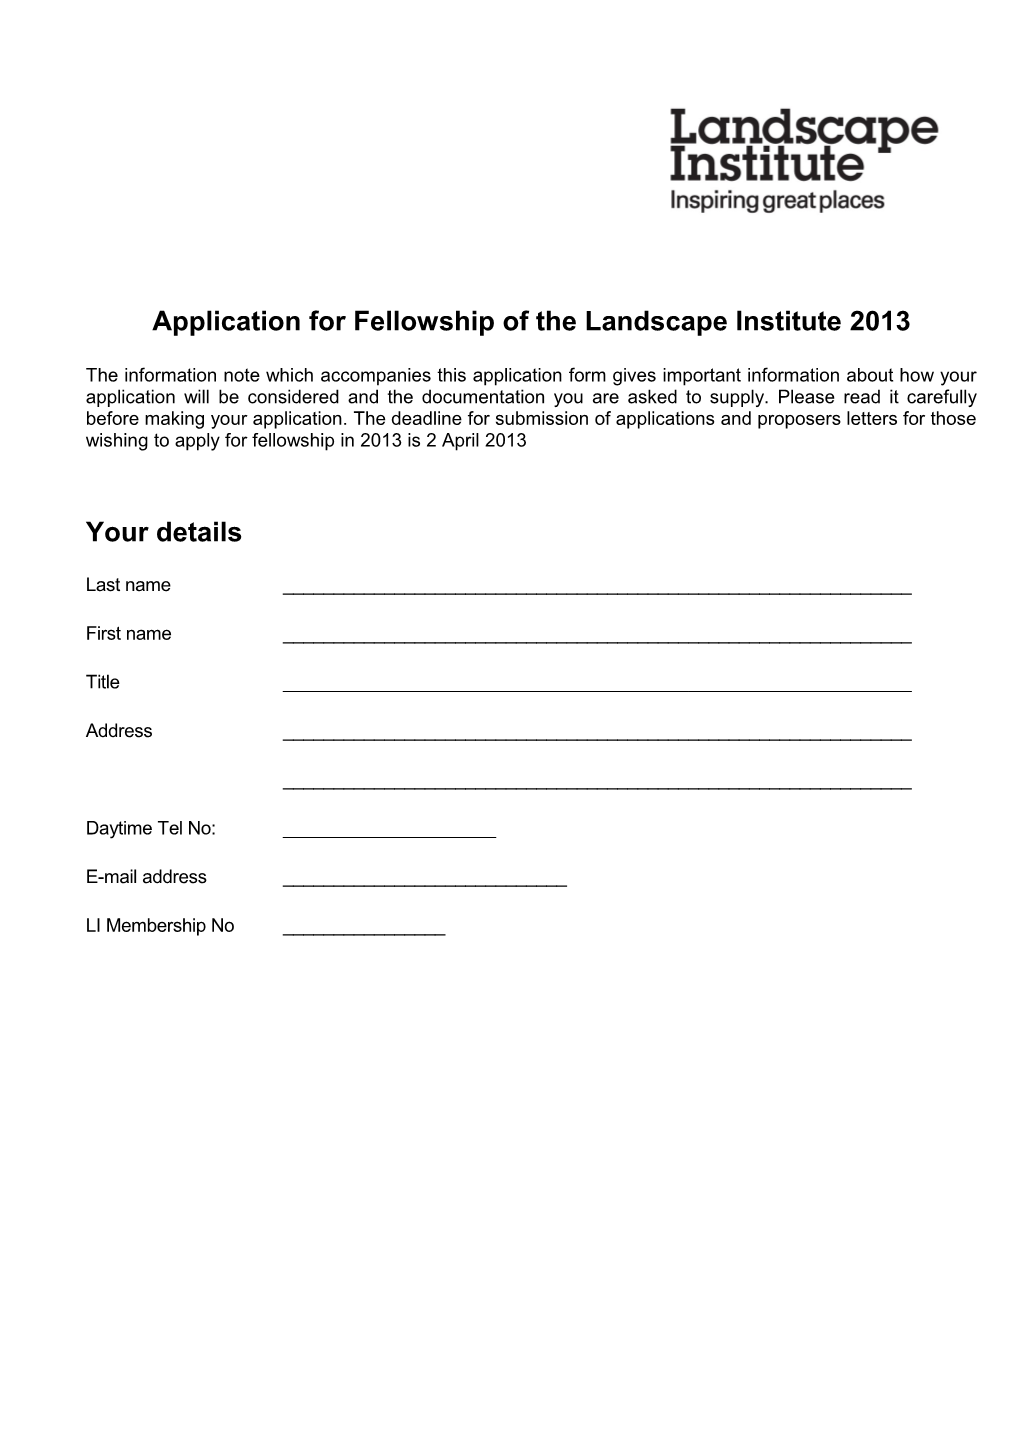 Application for Fellowship of the Landscape Institute 2013